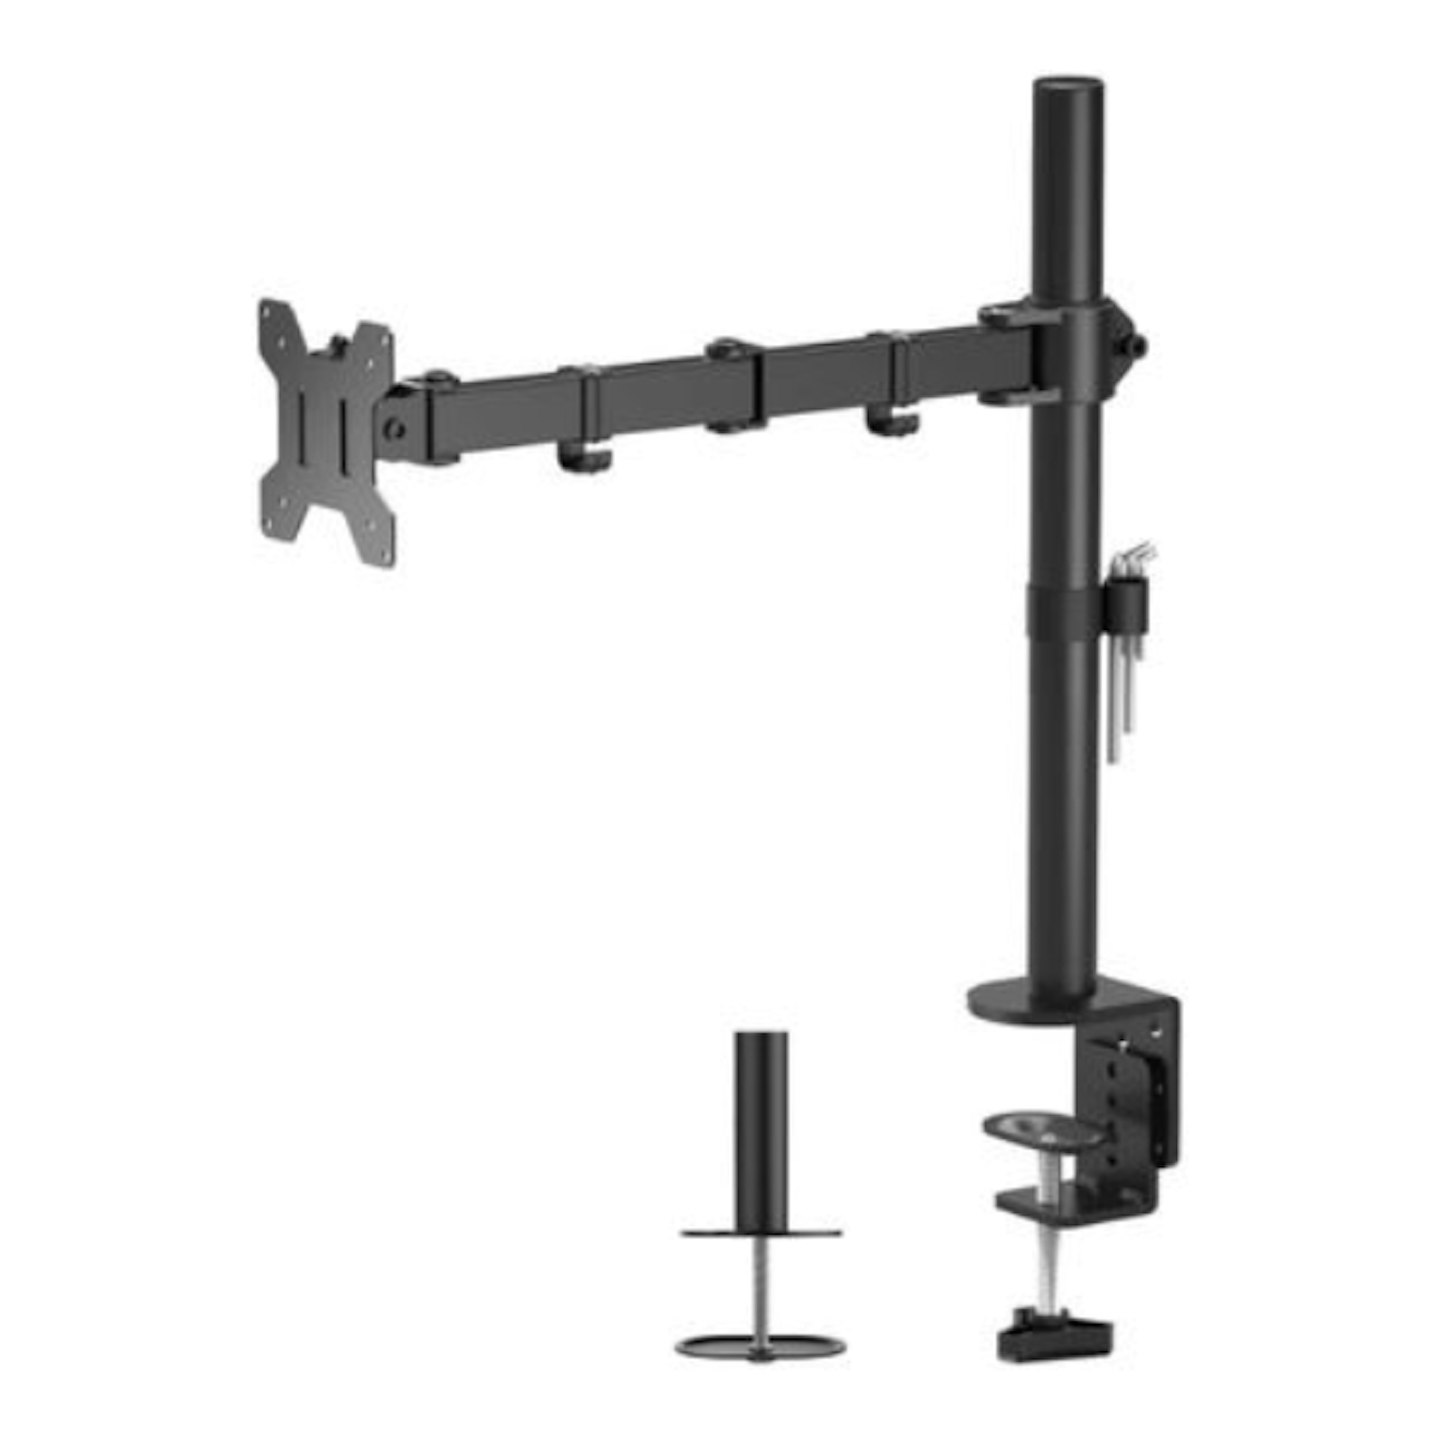 HUANUO Laptop Monitor Mount, Single Monitor Desk Mount Holds 13-32 inch  Computer Screen, Laptop Notebook Desk Mount Stand Fits Up to 17 inch, Fully